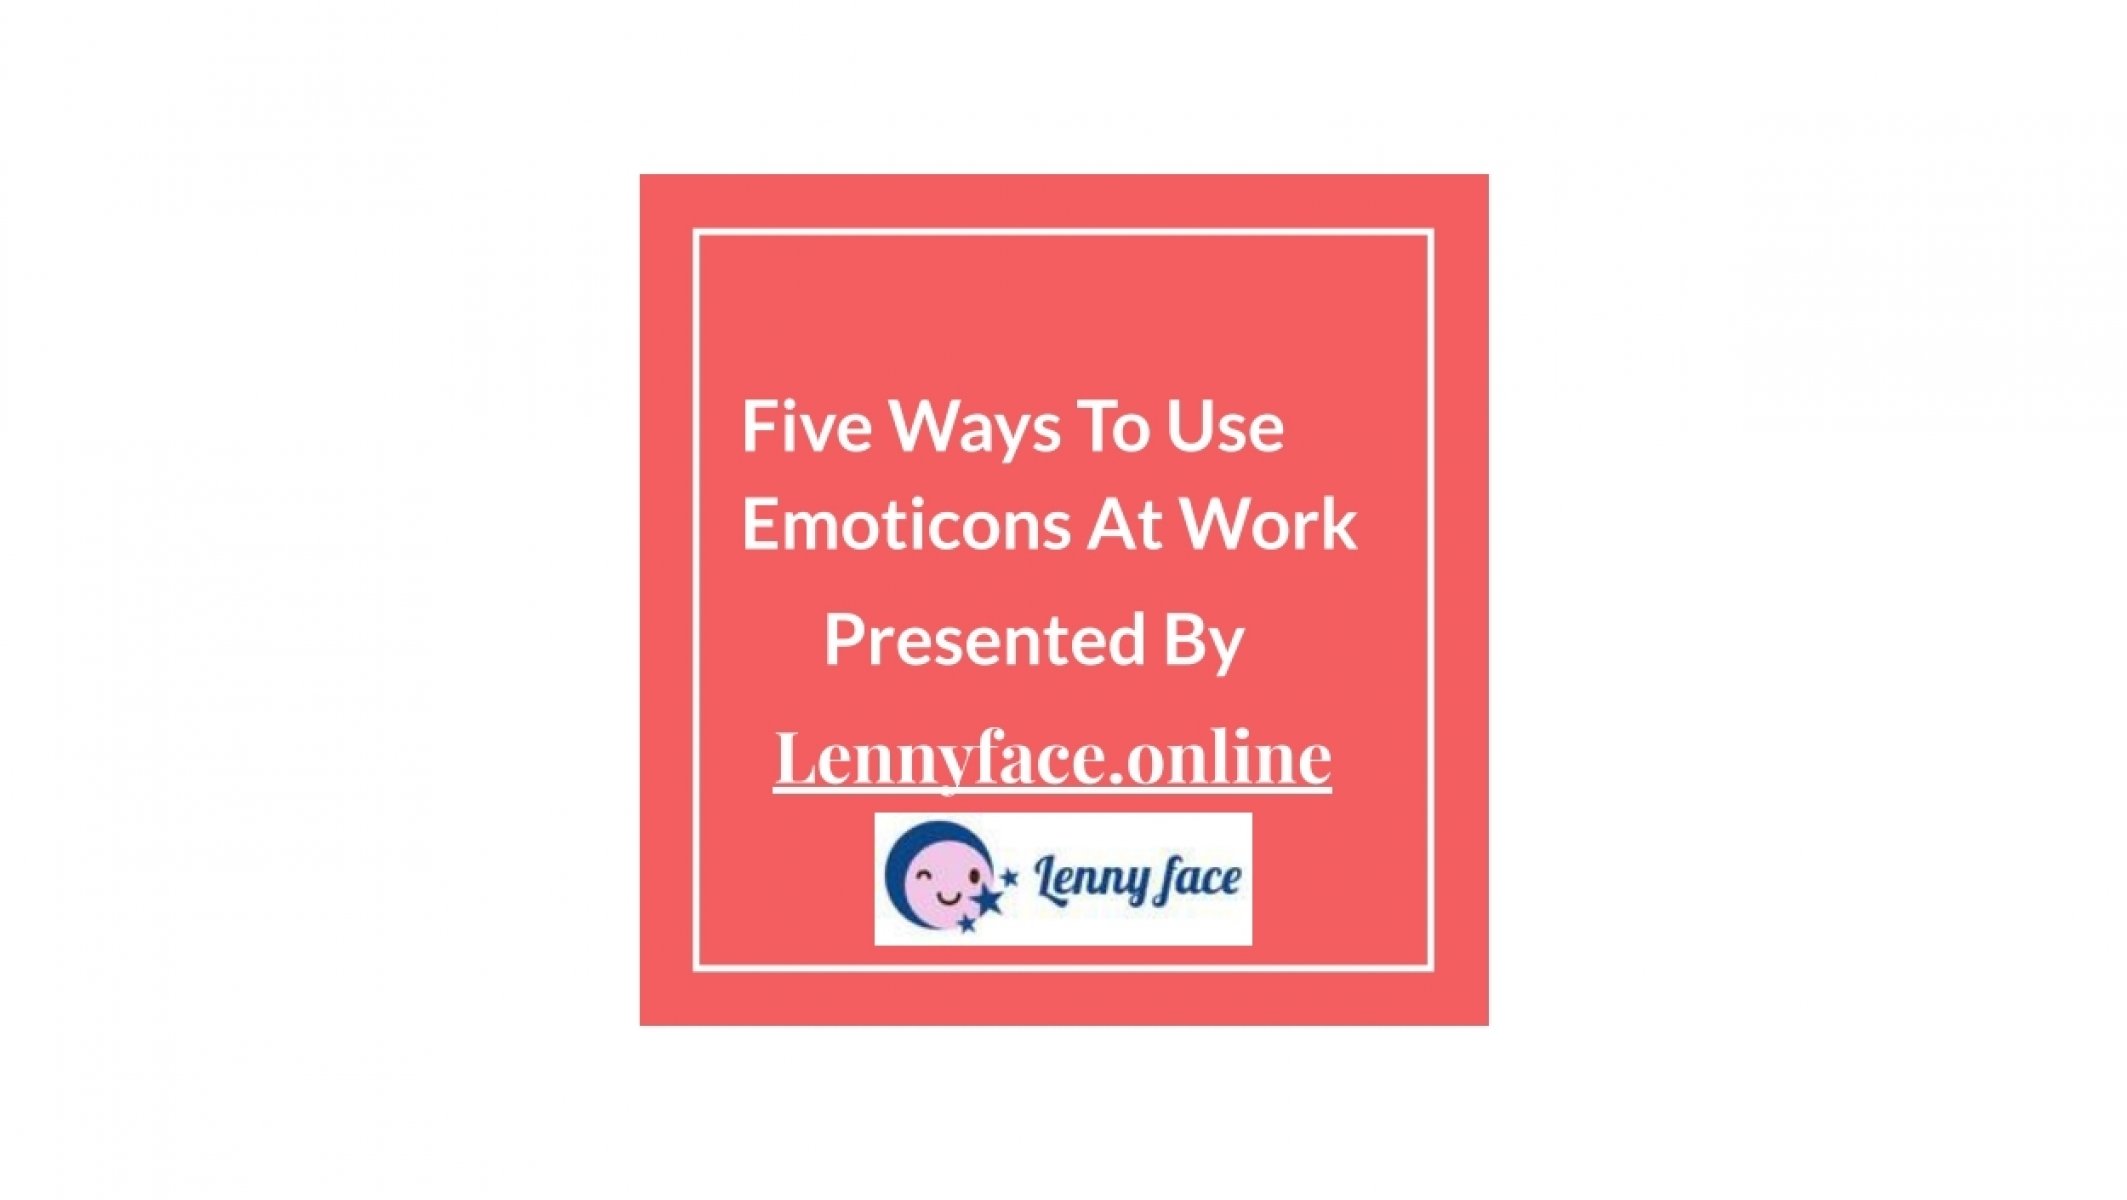 Five Ways To Use Emoticons At Work